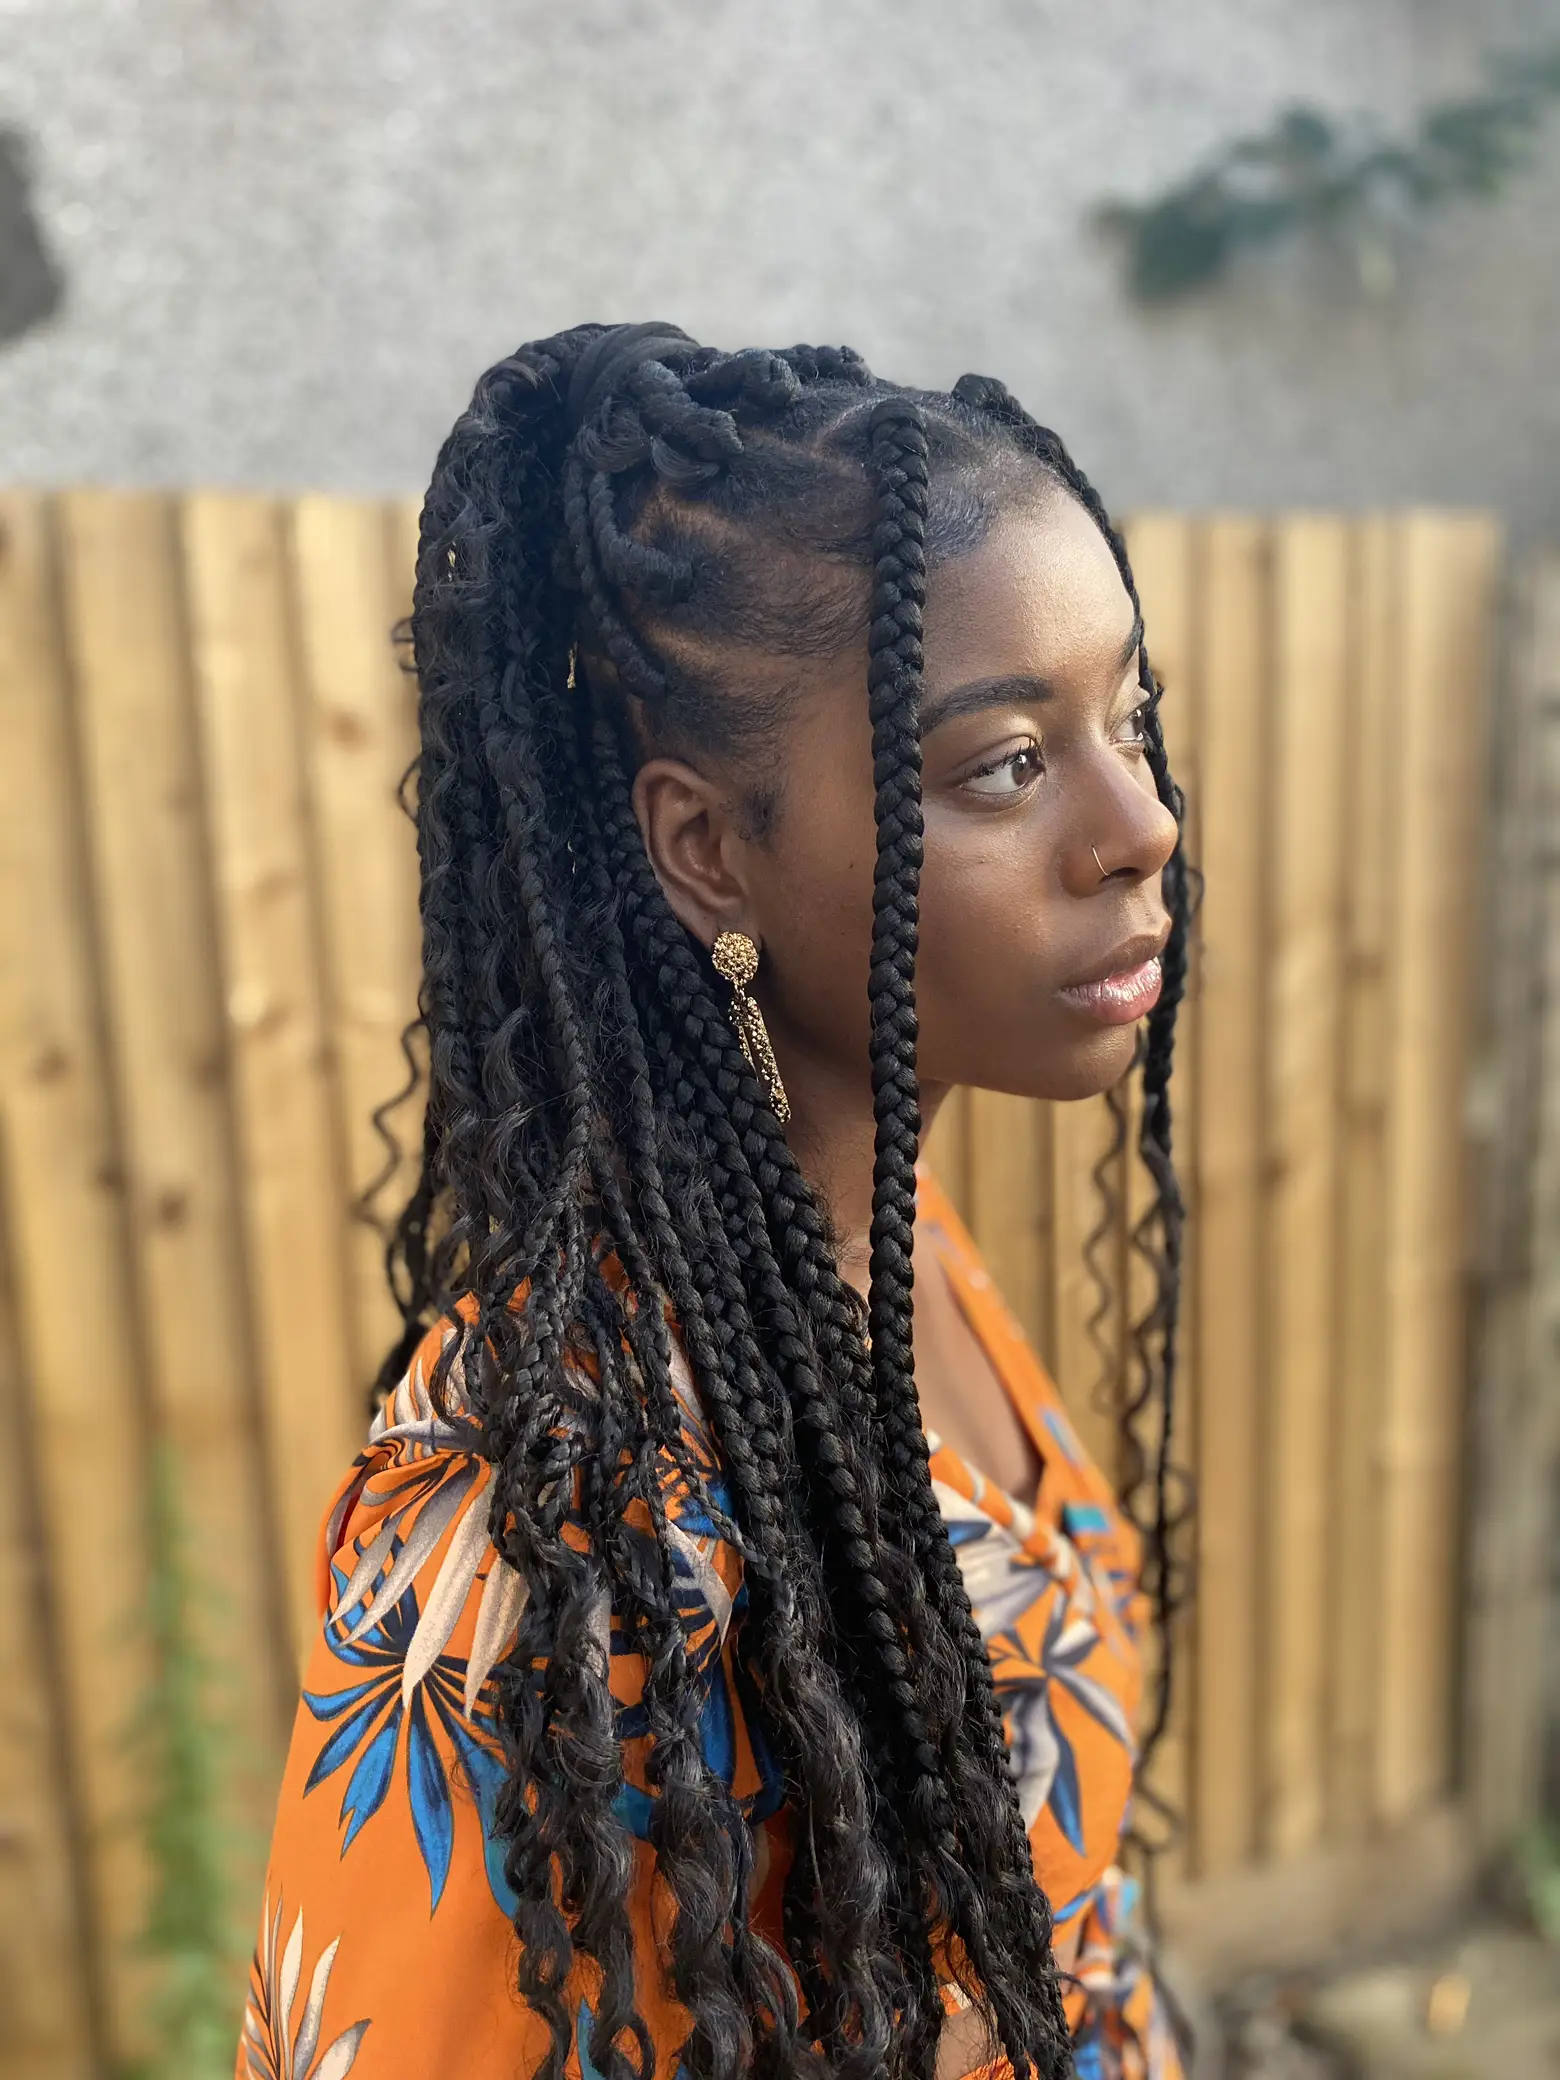 back to school hairstyle ideas ✏️🎓💇🏾‍♀️, Gallery posted by datgurlstace